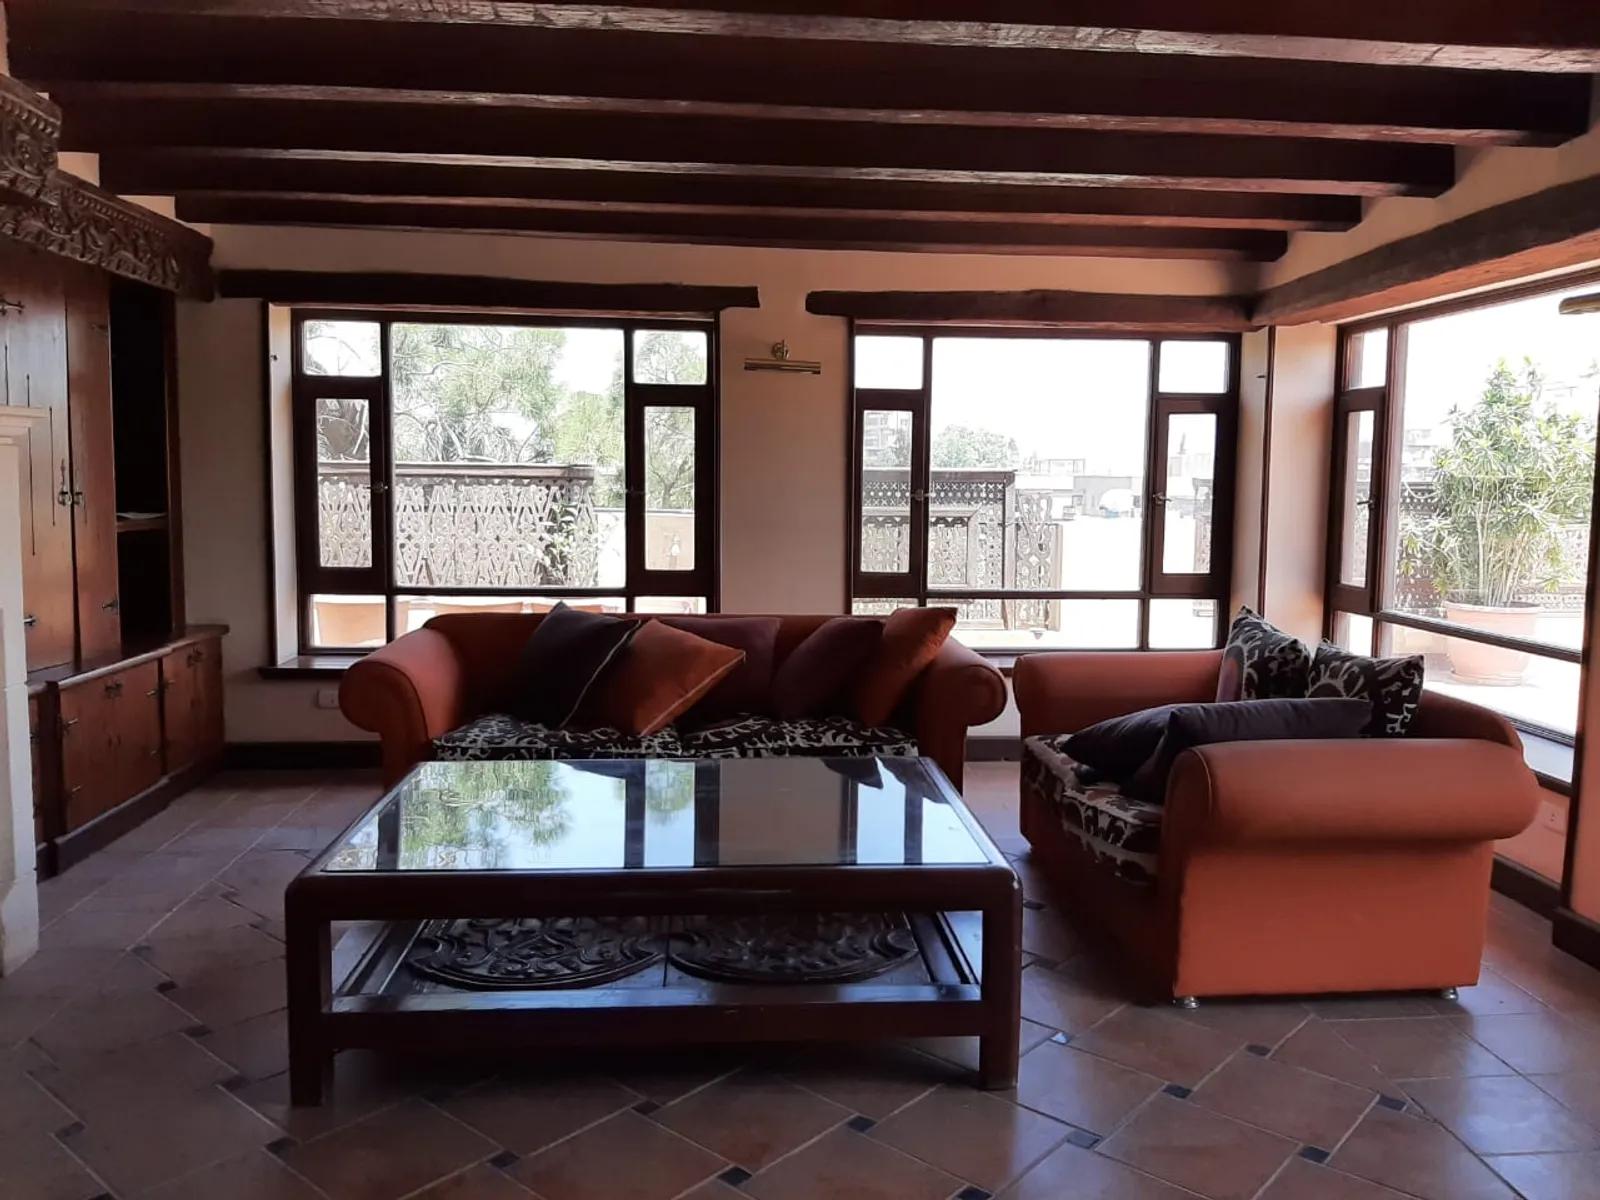 4 BEDROOMS MODERN PENTHOUSE FOR RENT IN MAADI SARAYAT - #5727 - Modern furnished